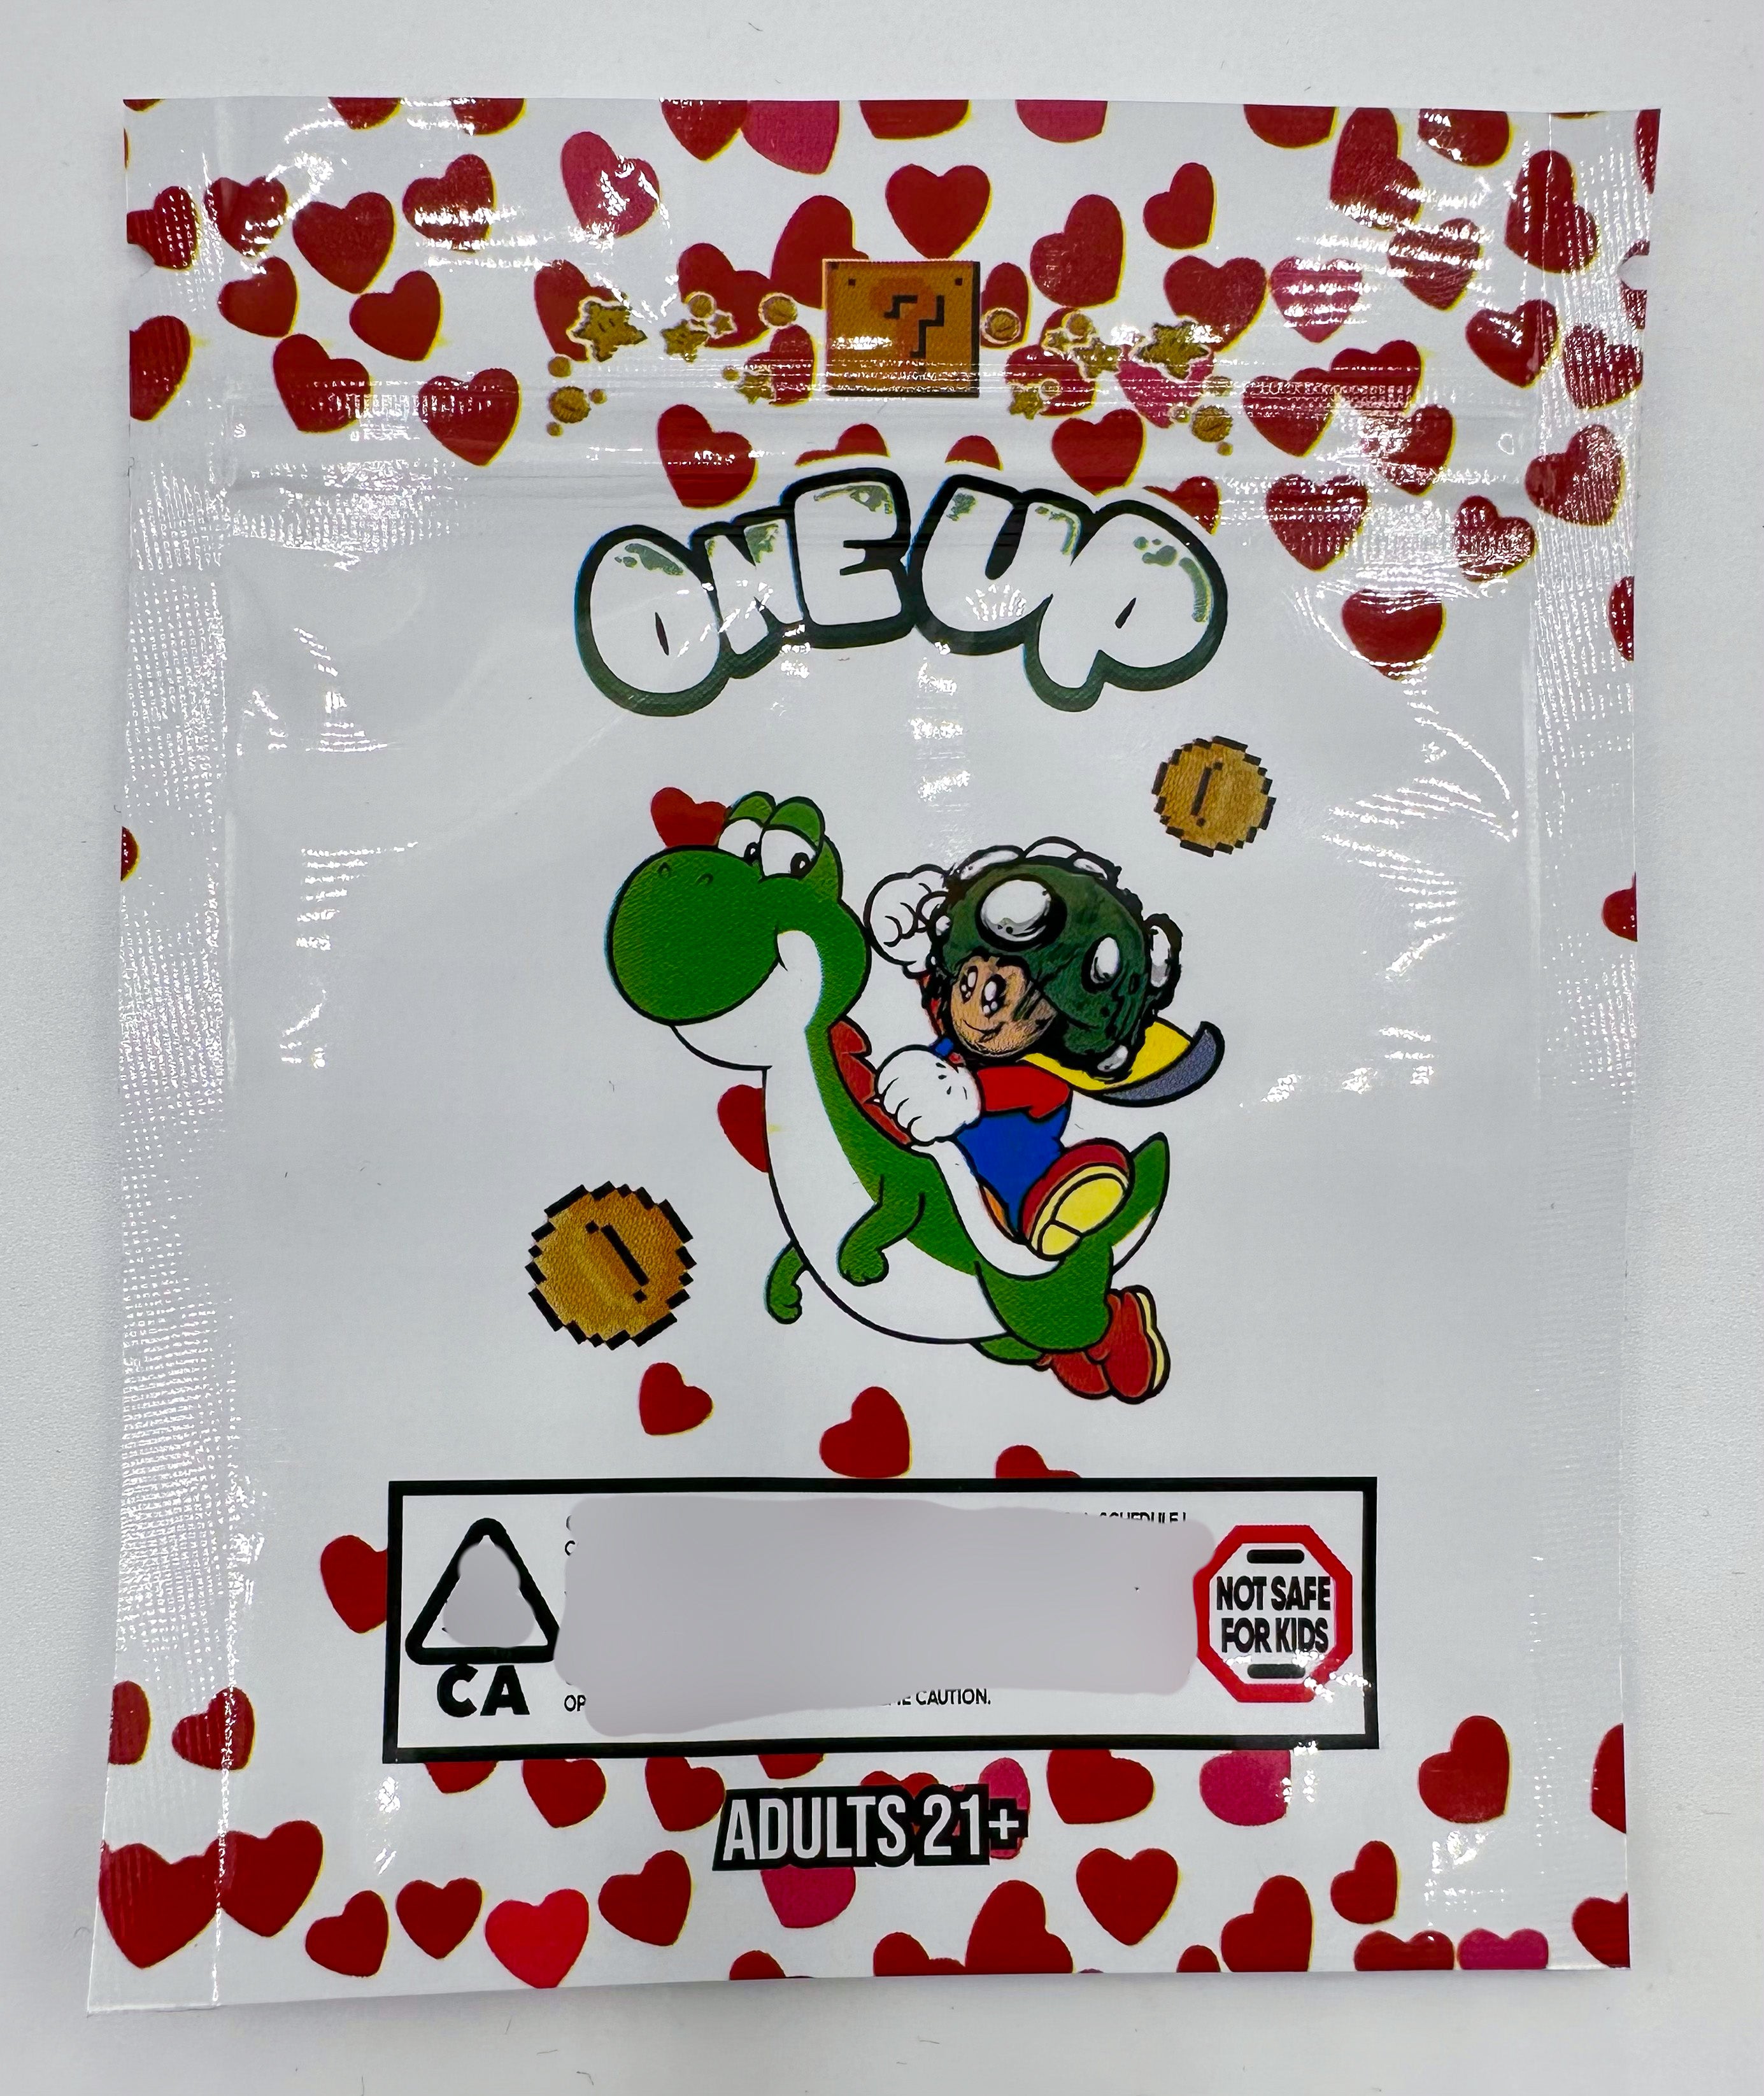 One Up Strawberry Puffs Edibles  Mylar bags